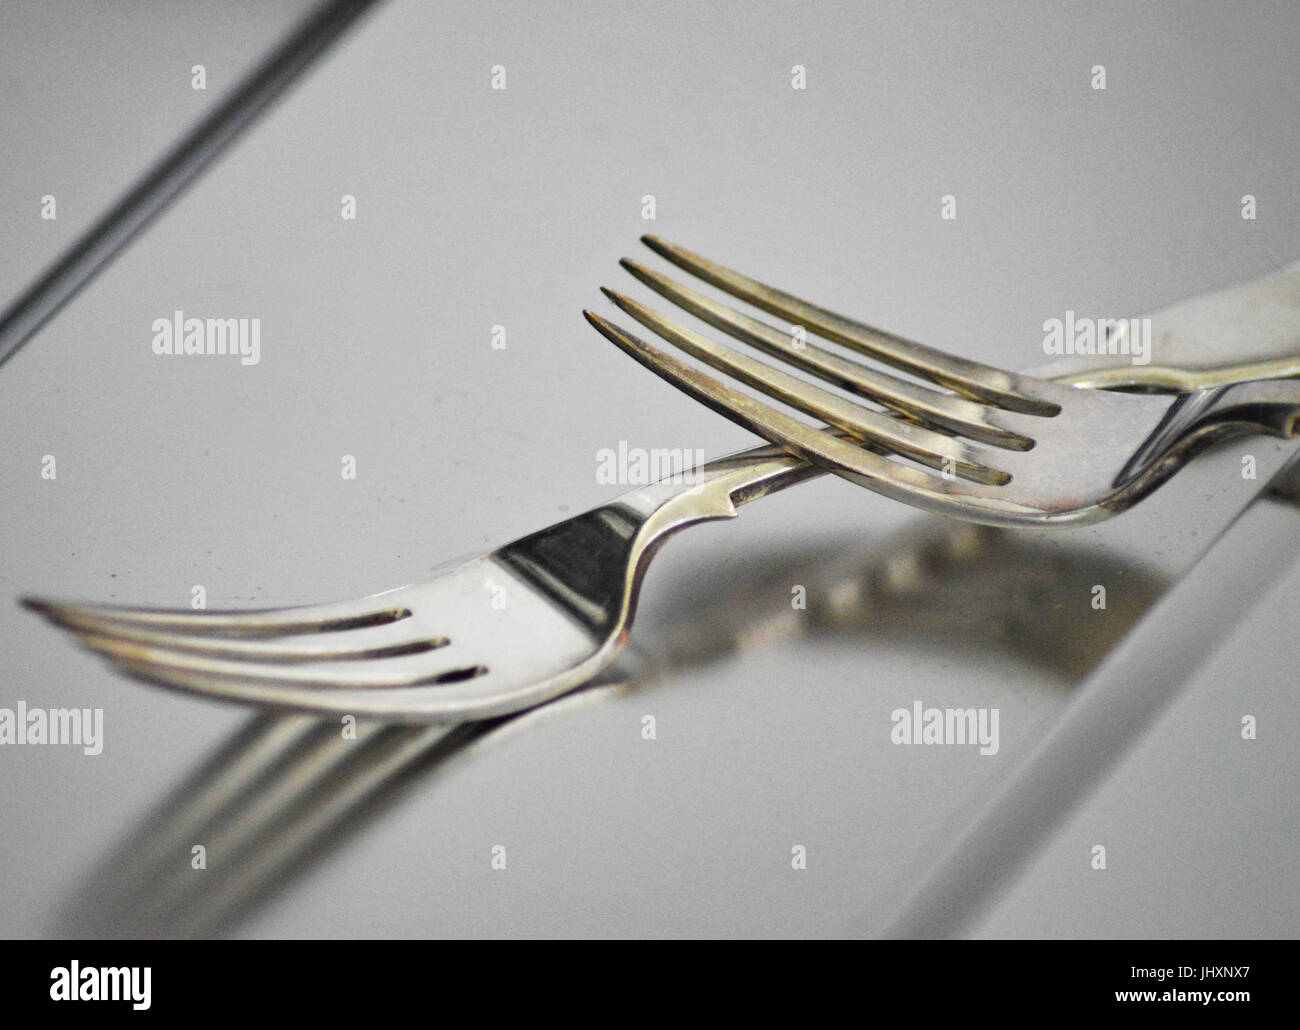 Forks, silverwave, stainless steel Stock Photo